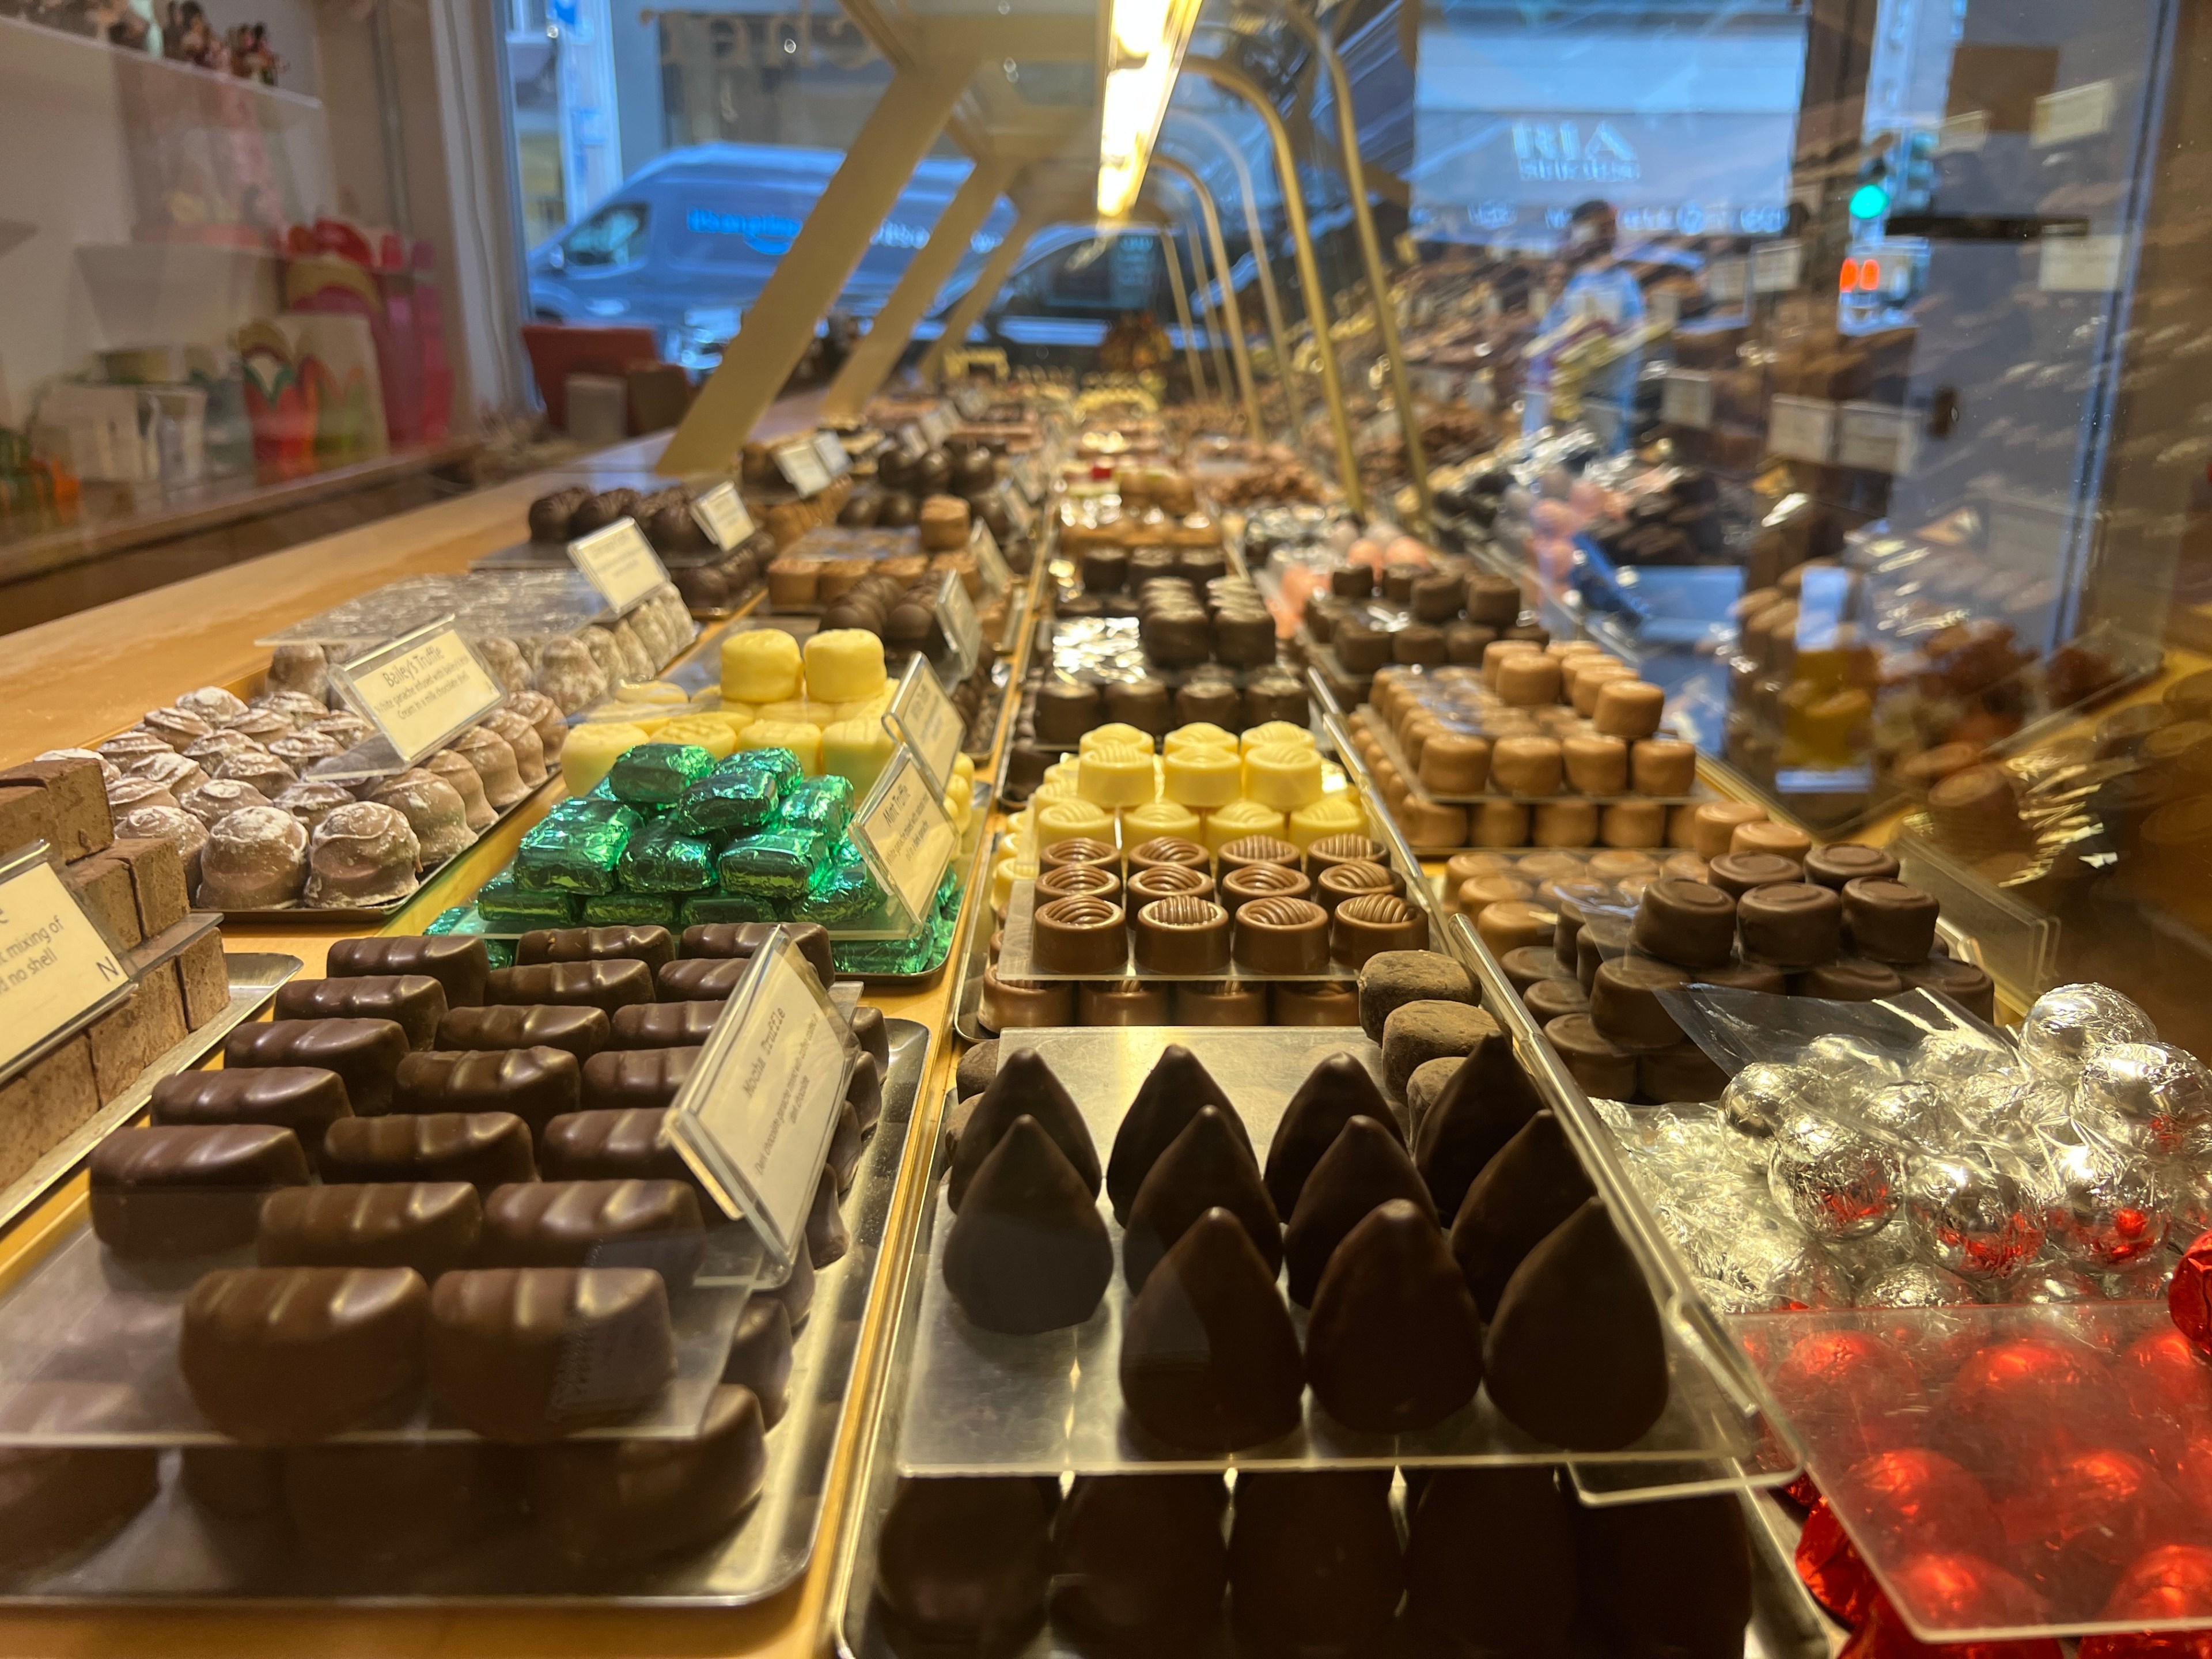 An assortment of individual chocolates is visible through a glass display case.